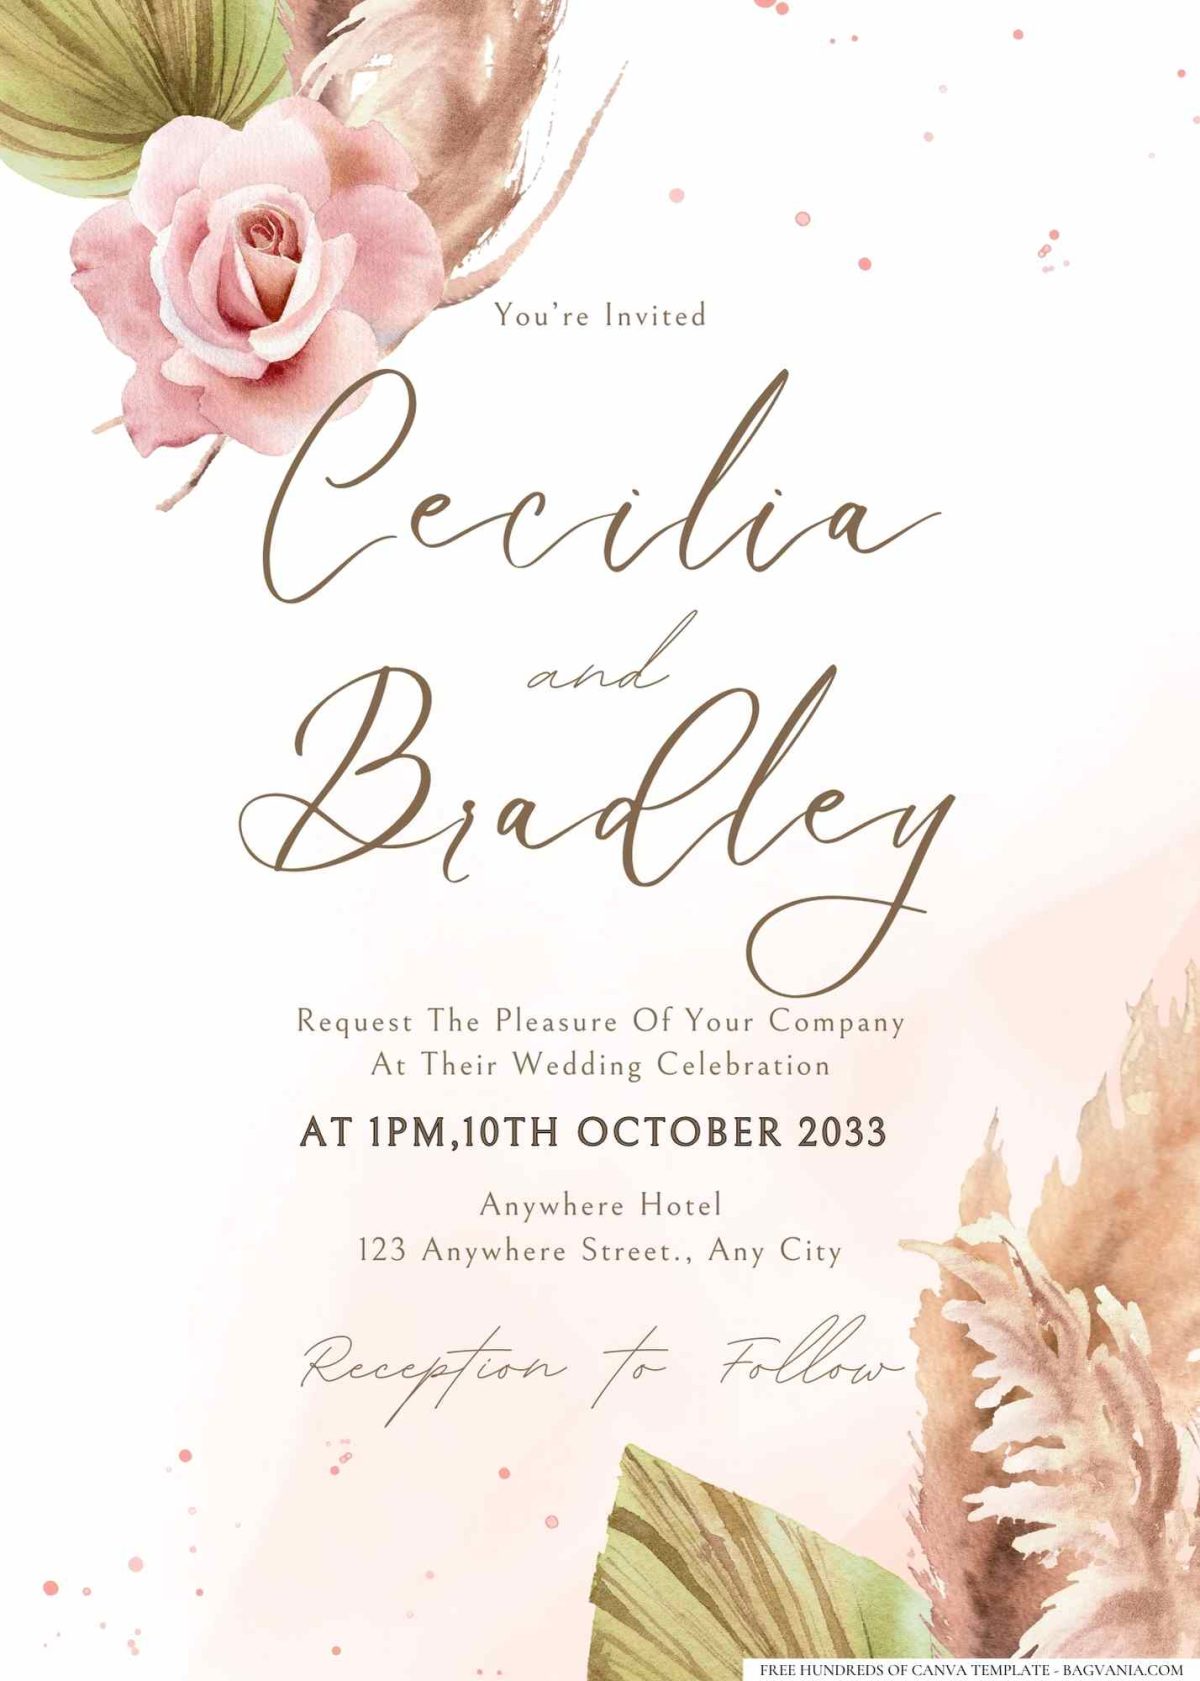 FREE Editable watercolor floral designs in soft pastel hues wedding invitation